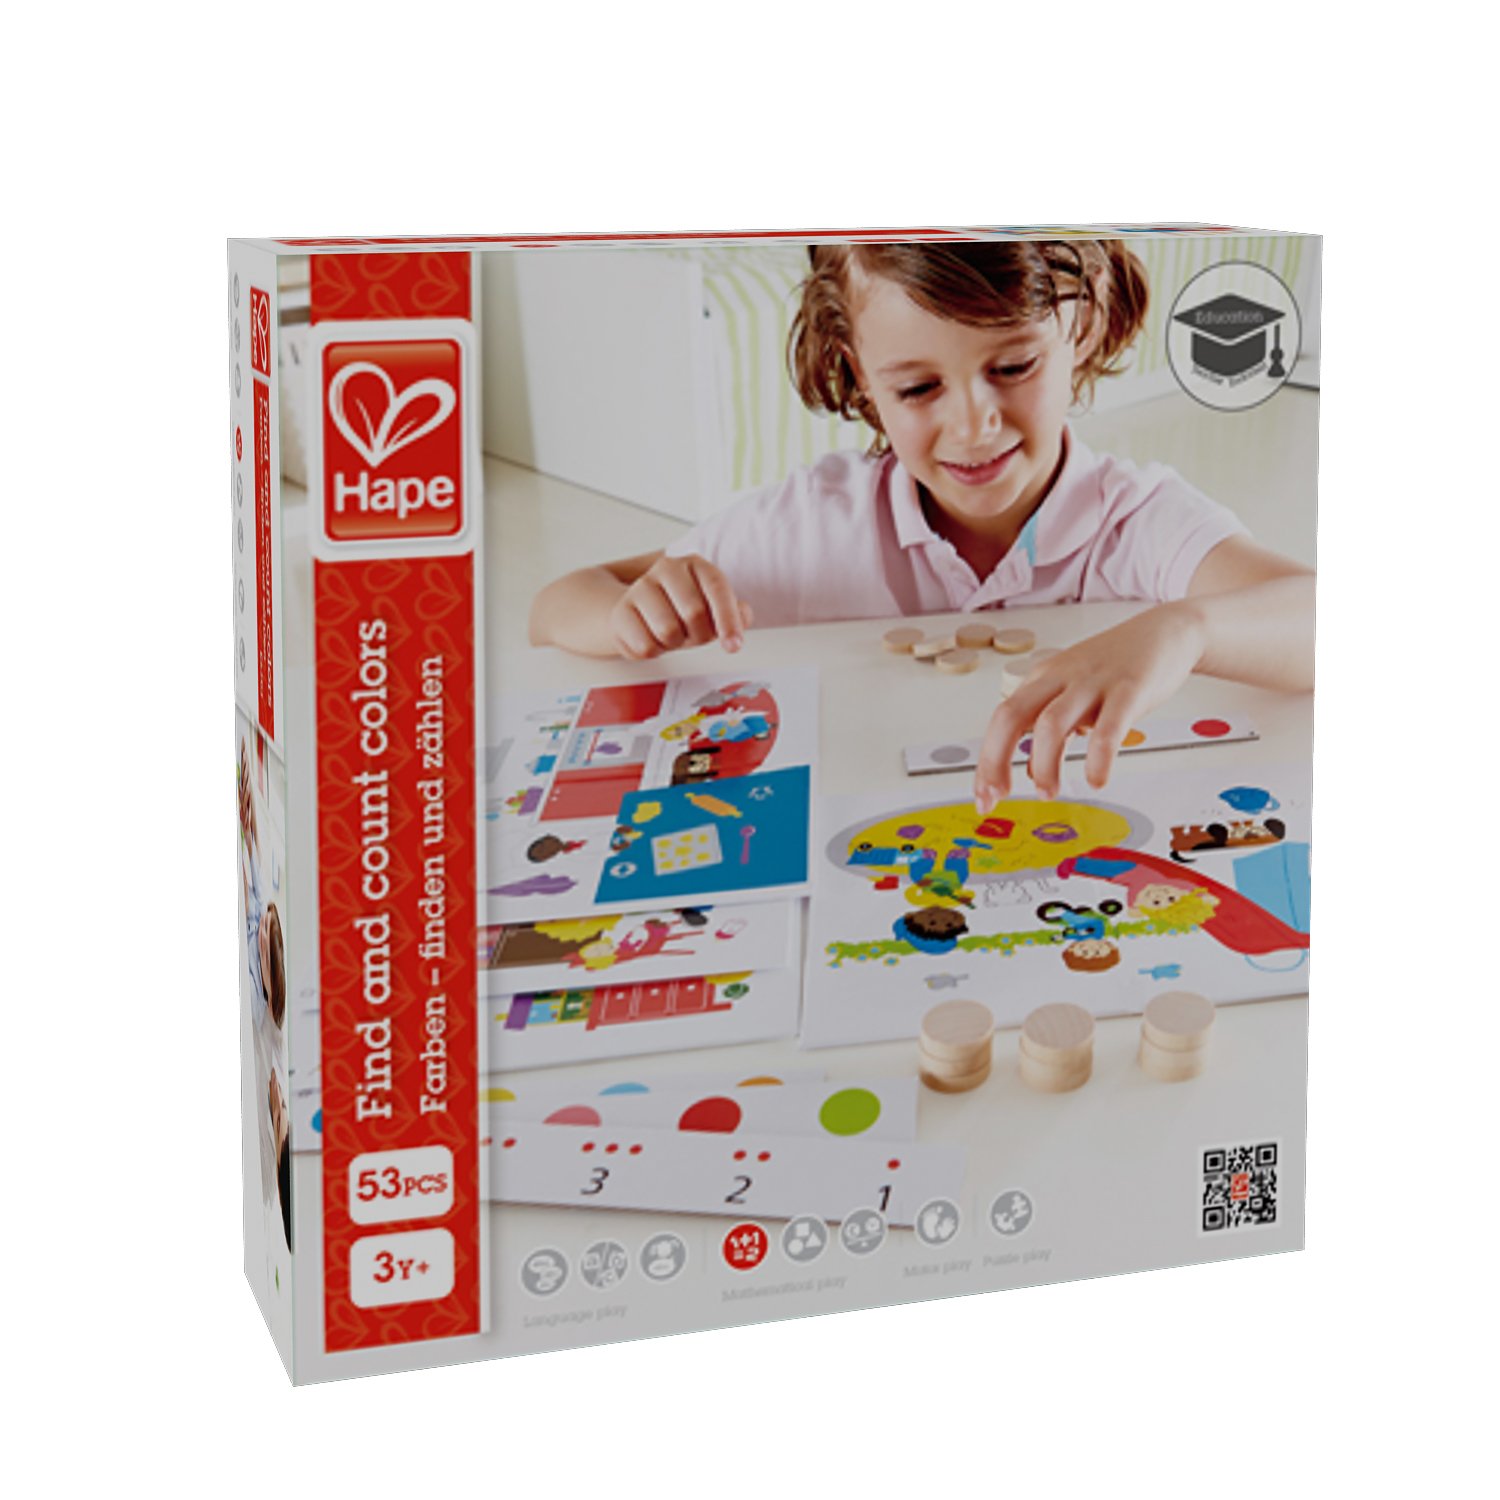 Hape HAP-E6301 Home Education Find and Count Colours by Hape Home Education